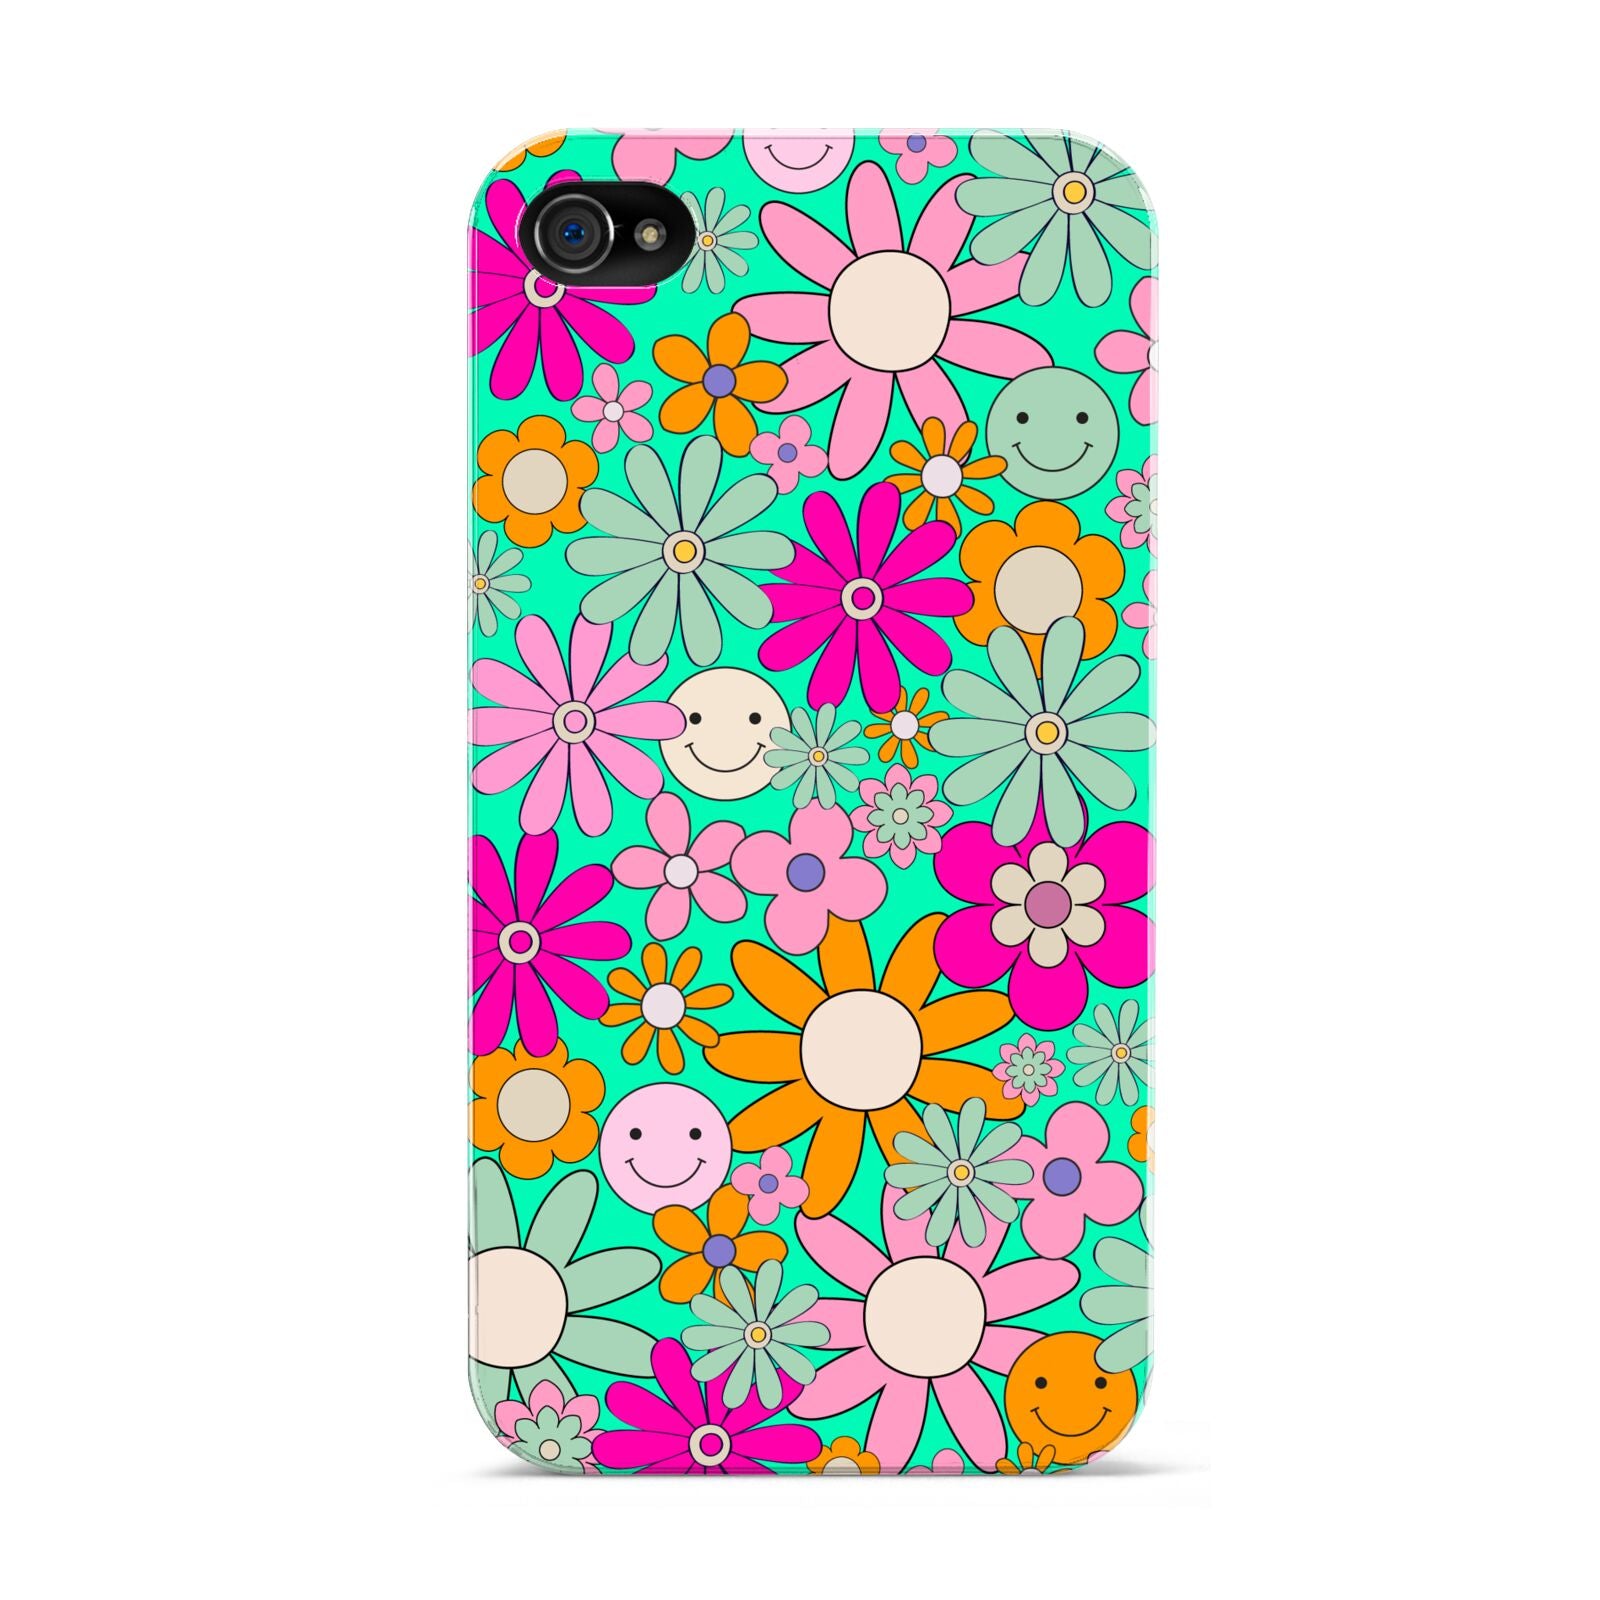 Hippy Floral Apple iPhone 4s Case